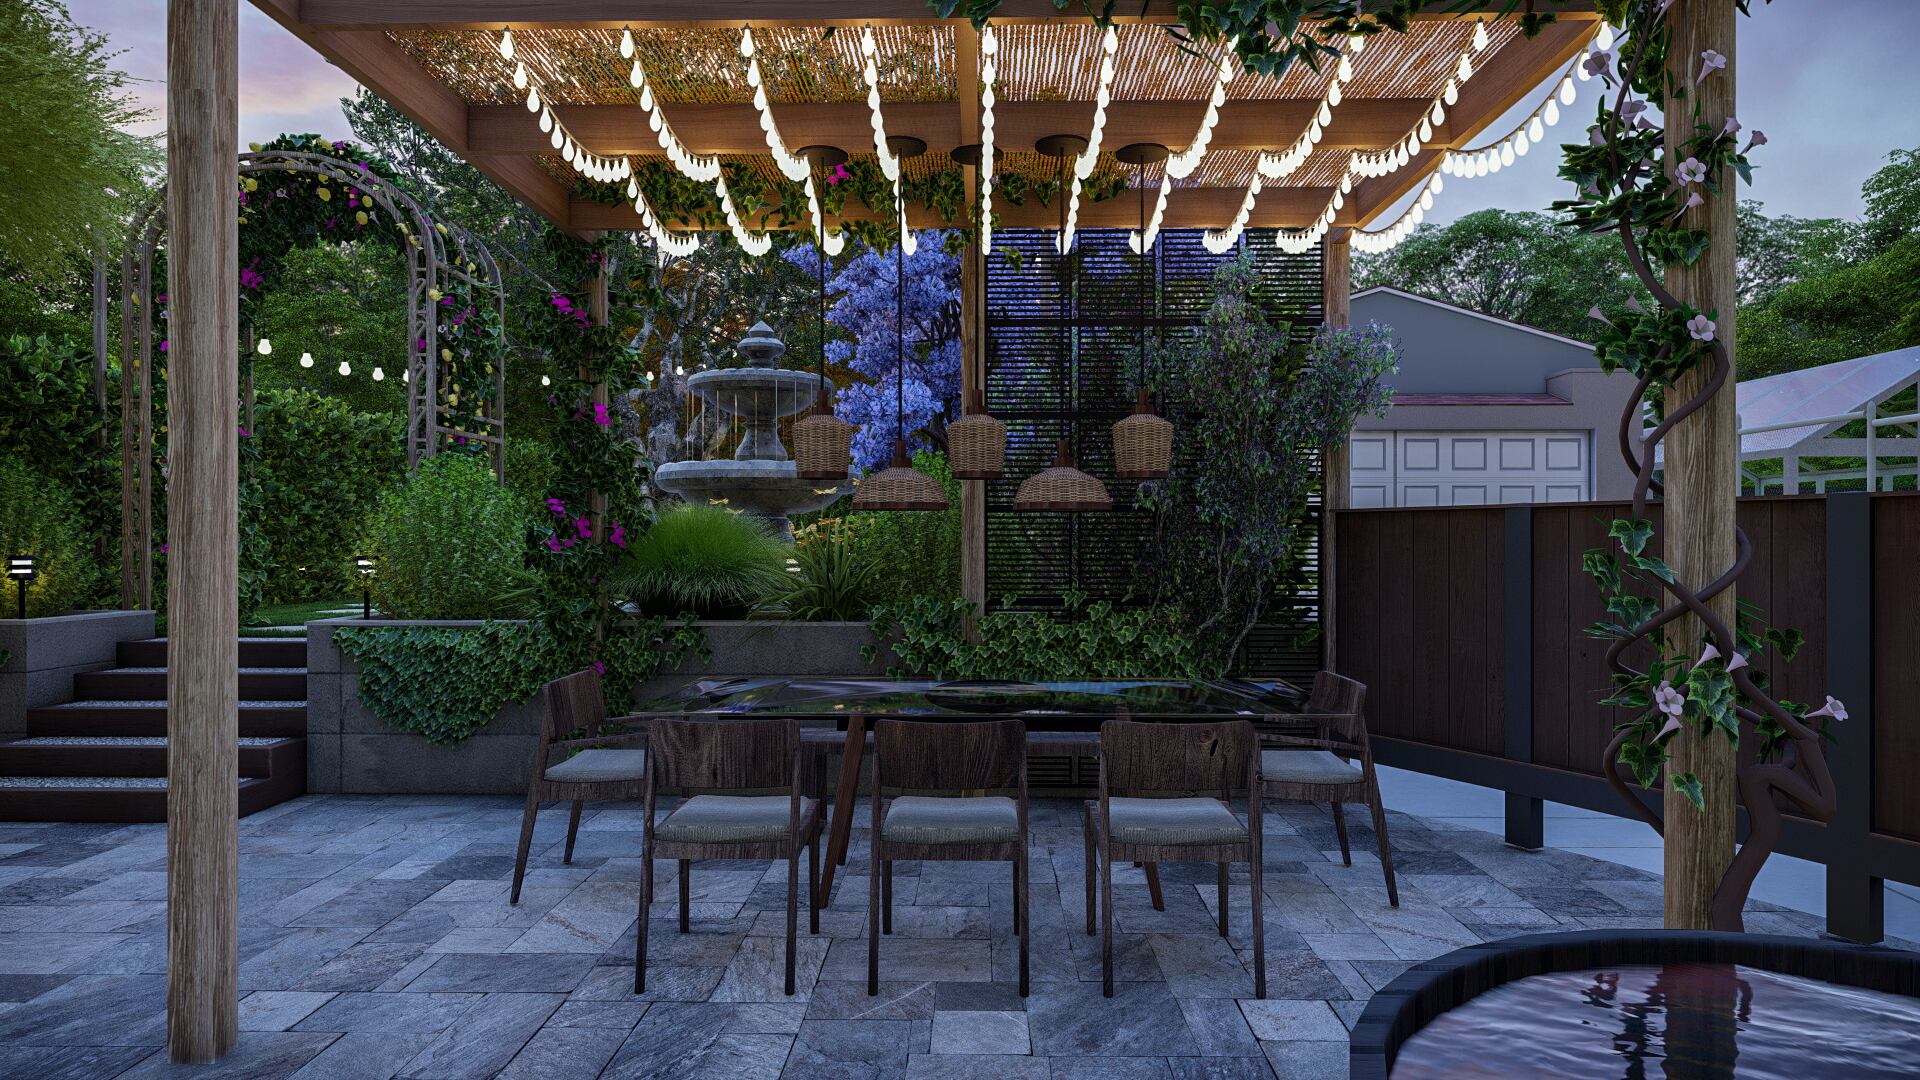 A welcoming outdoor dining area with a barbecue setup and a large table, designed for Mediterranean-style gatherings.